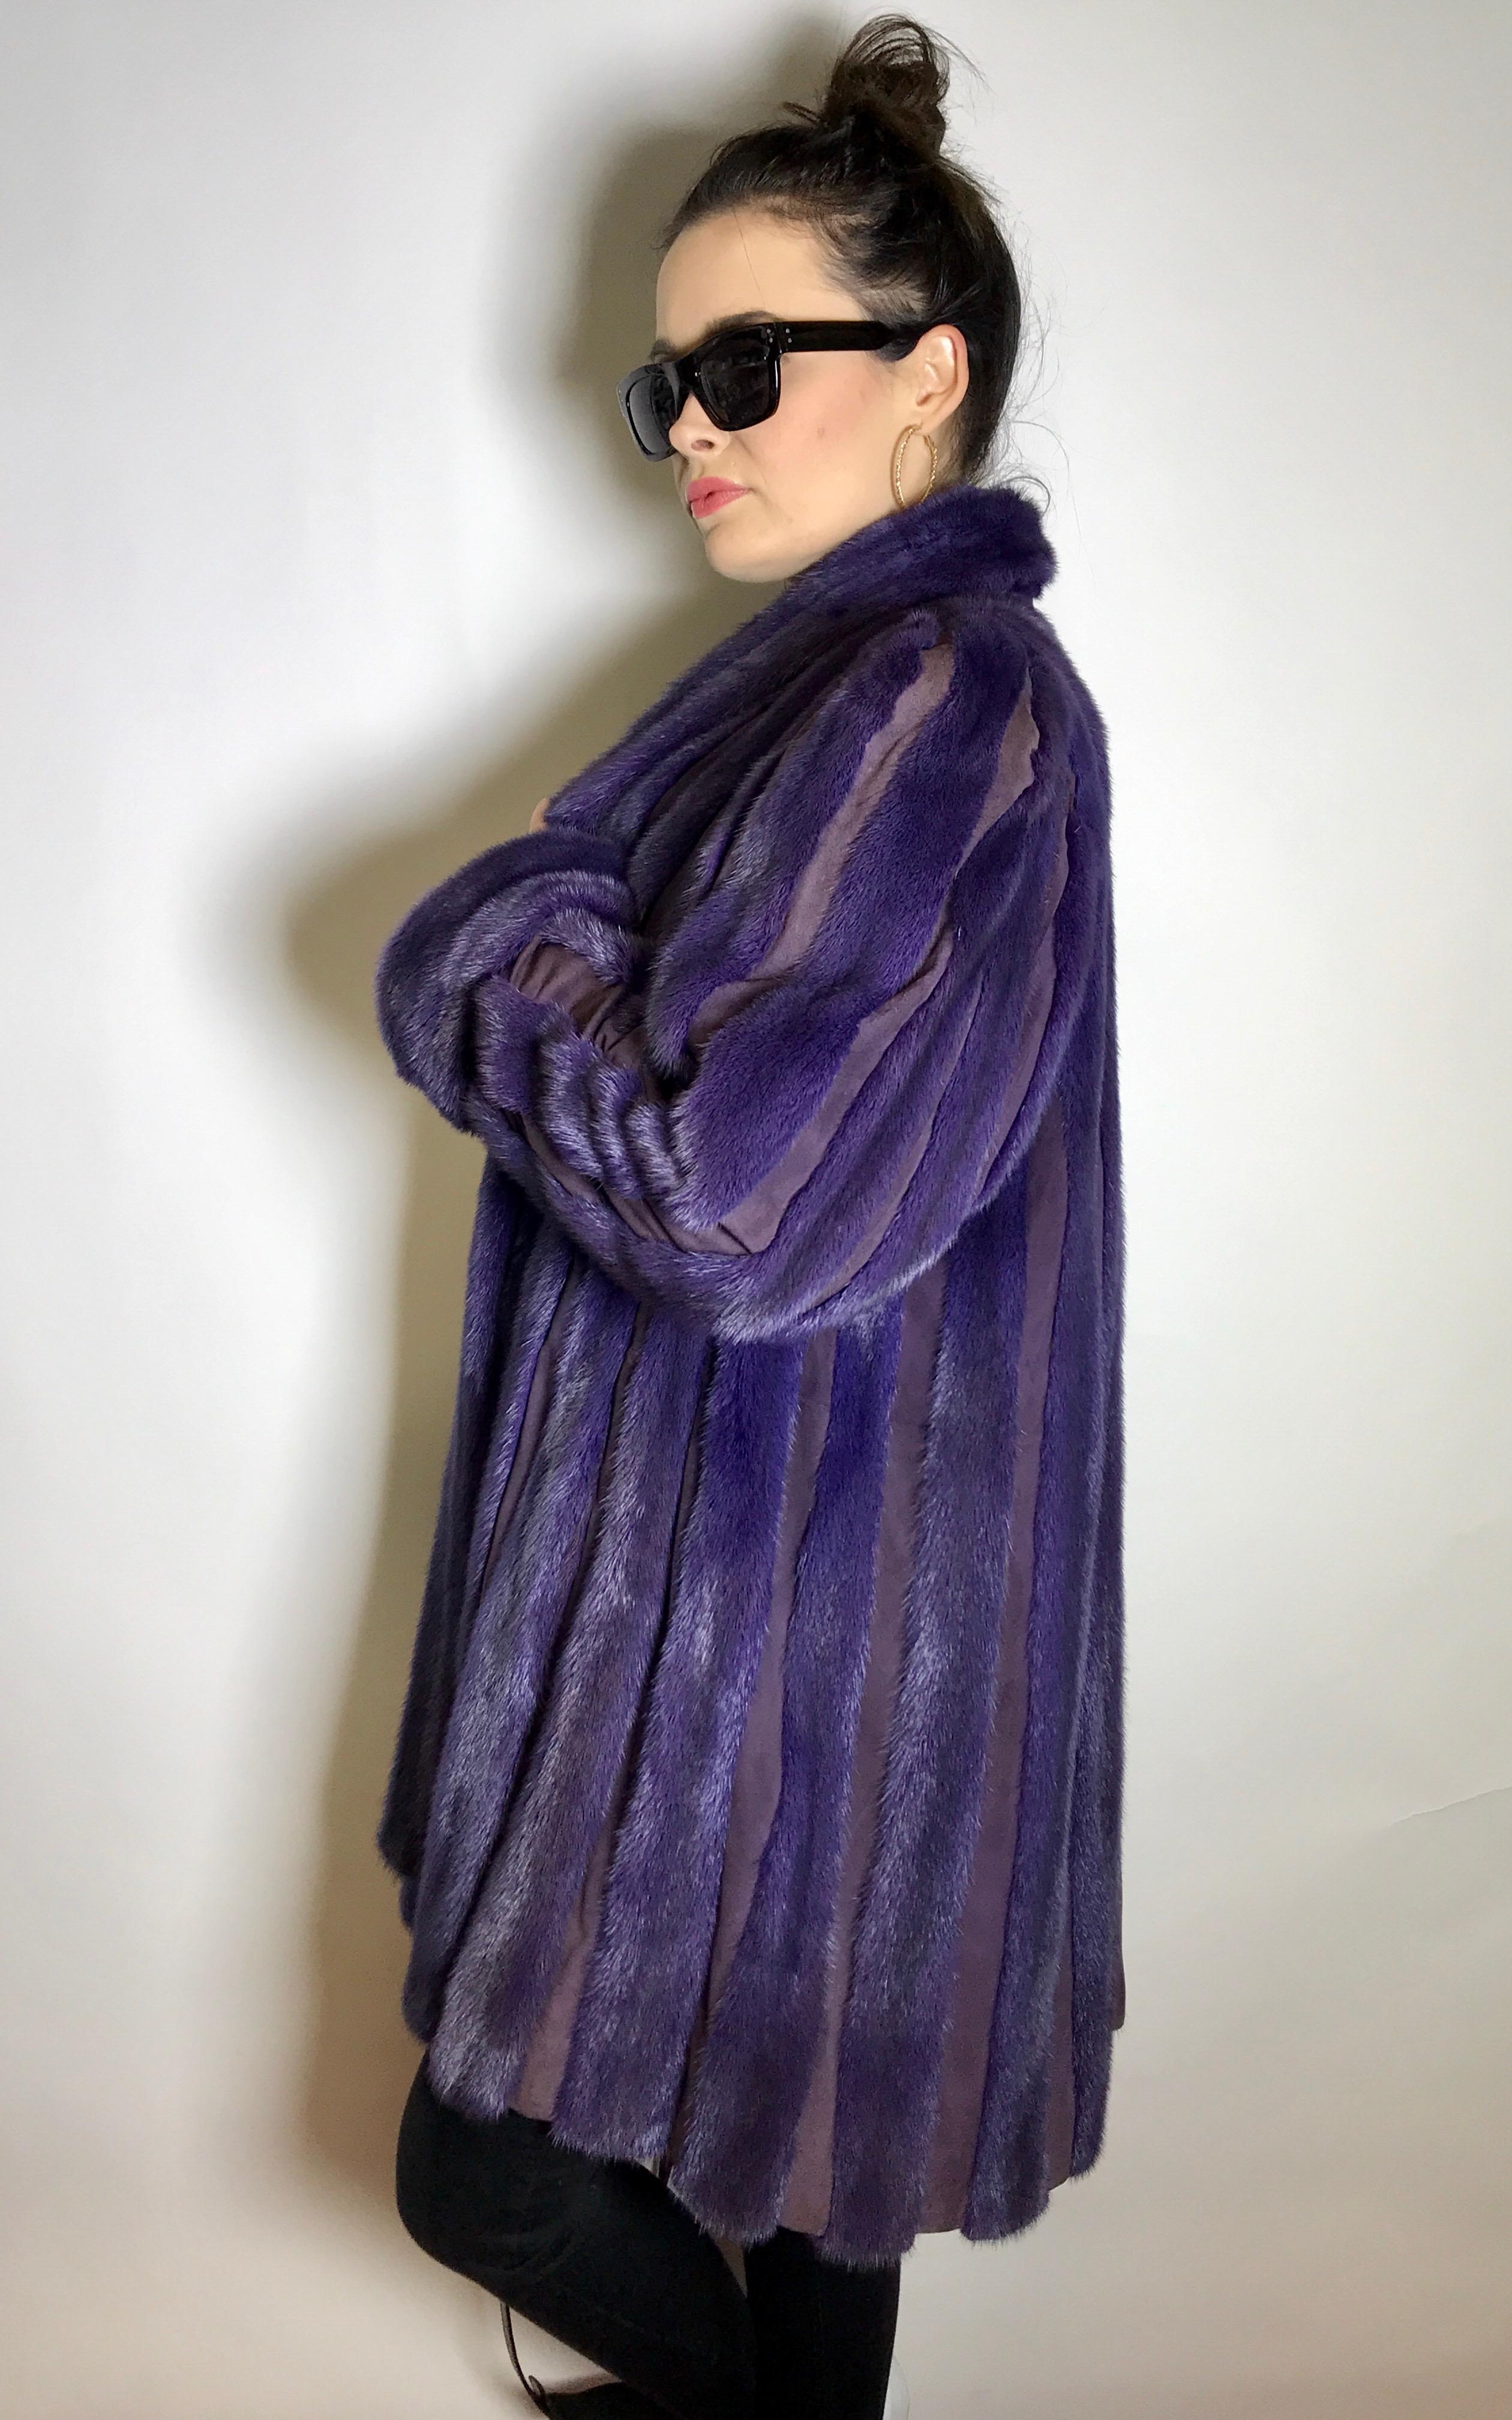 High class violet silk mink 3/4 jacket / coat.
Exclusively made by 